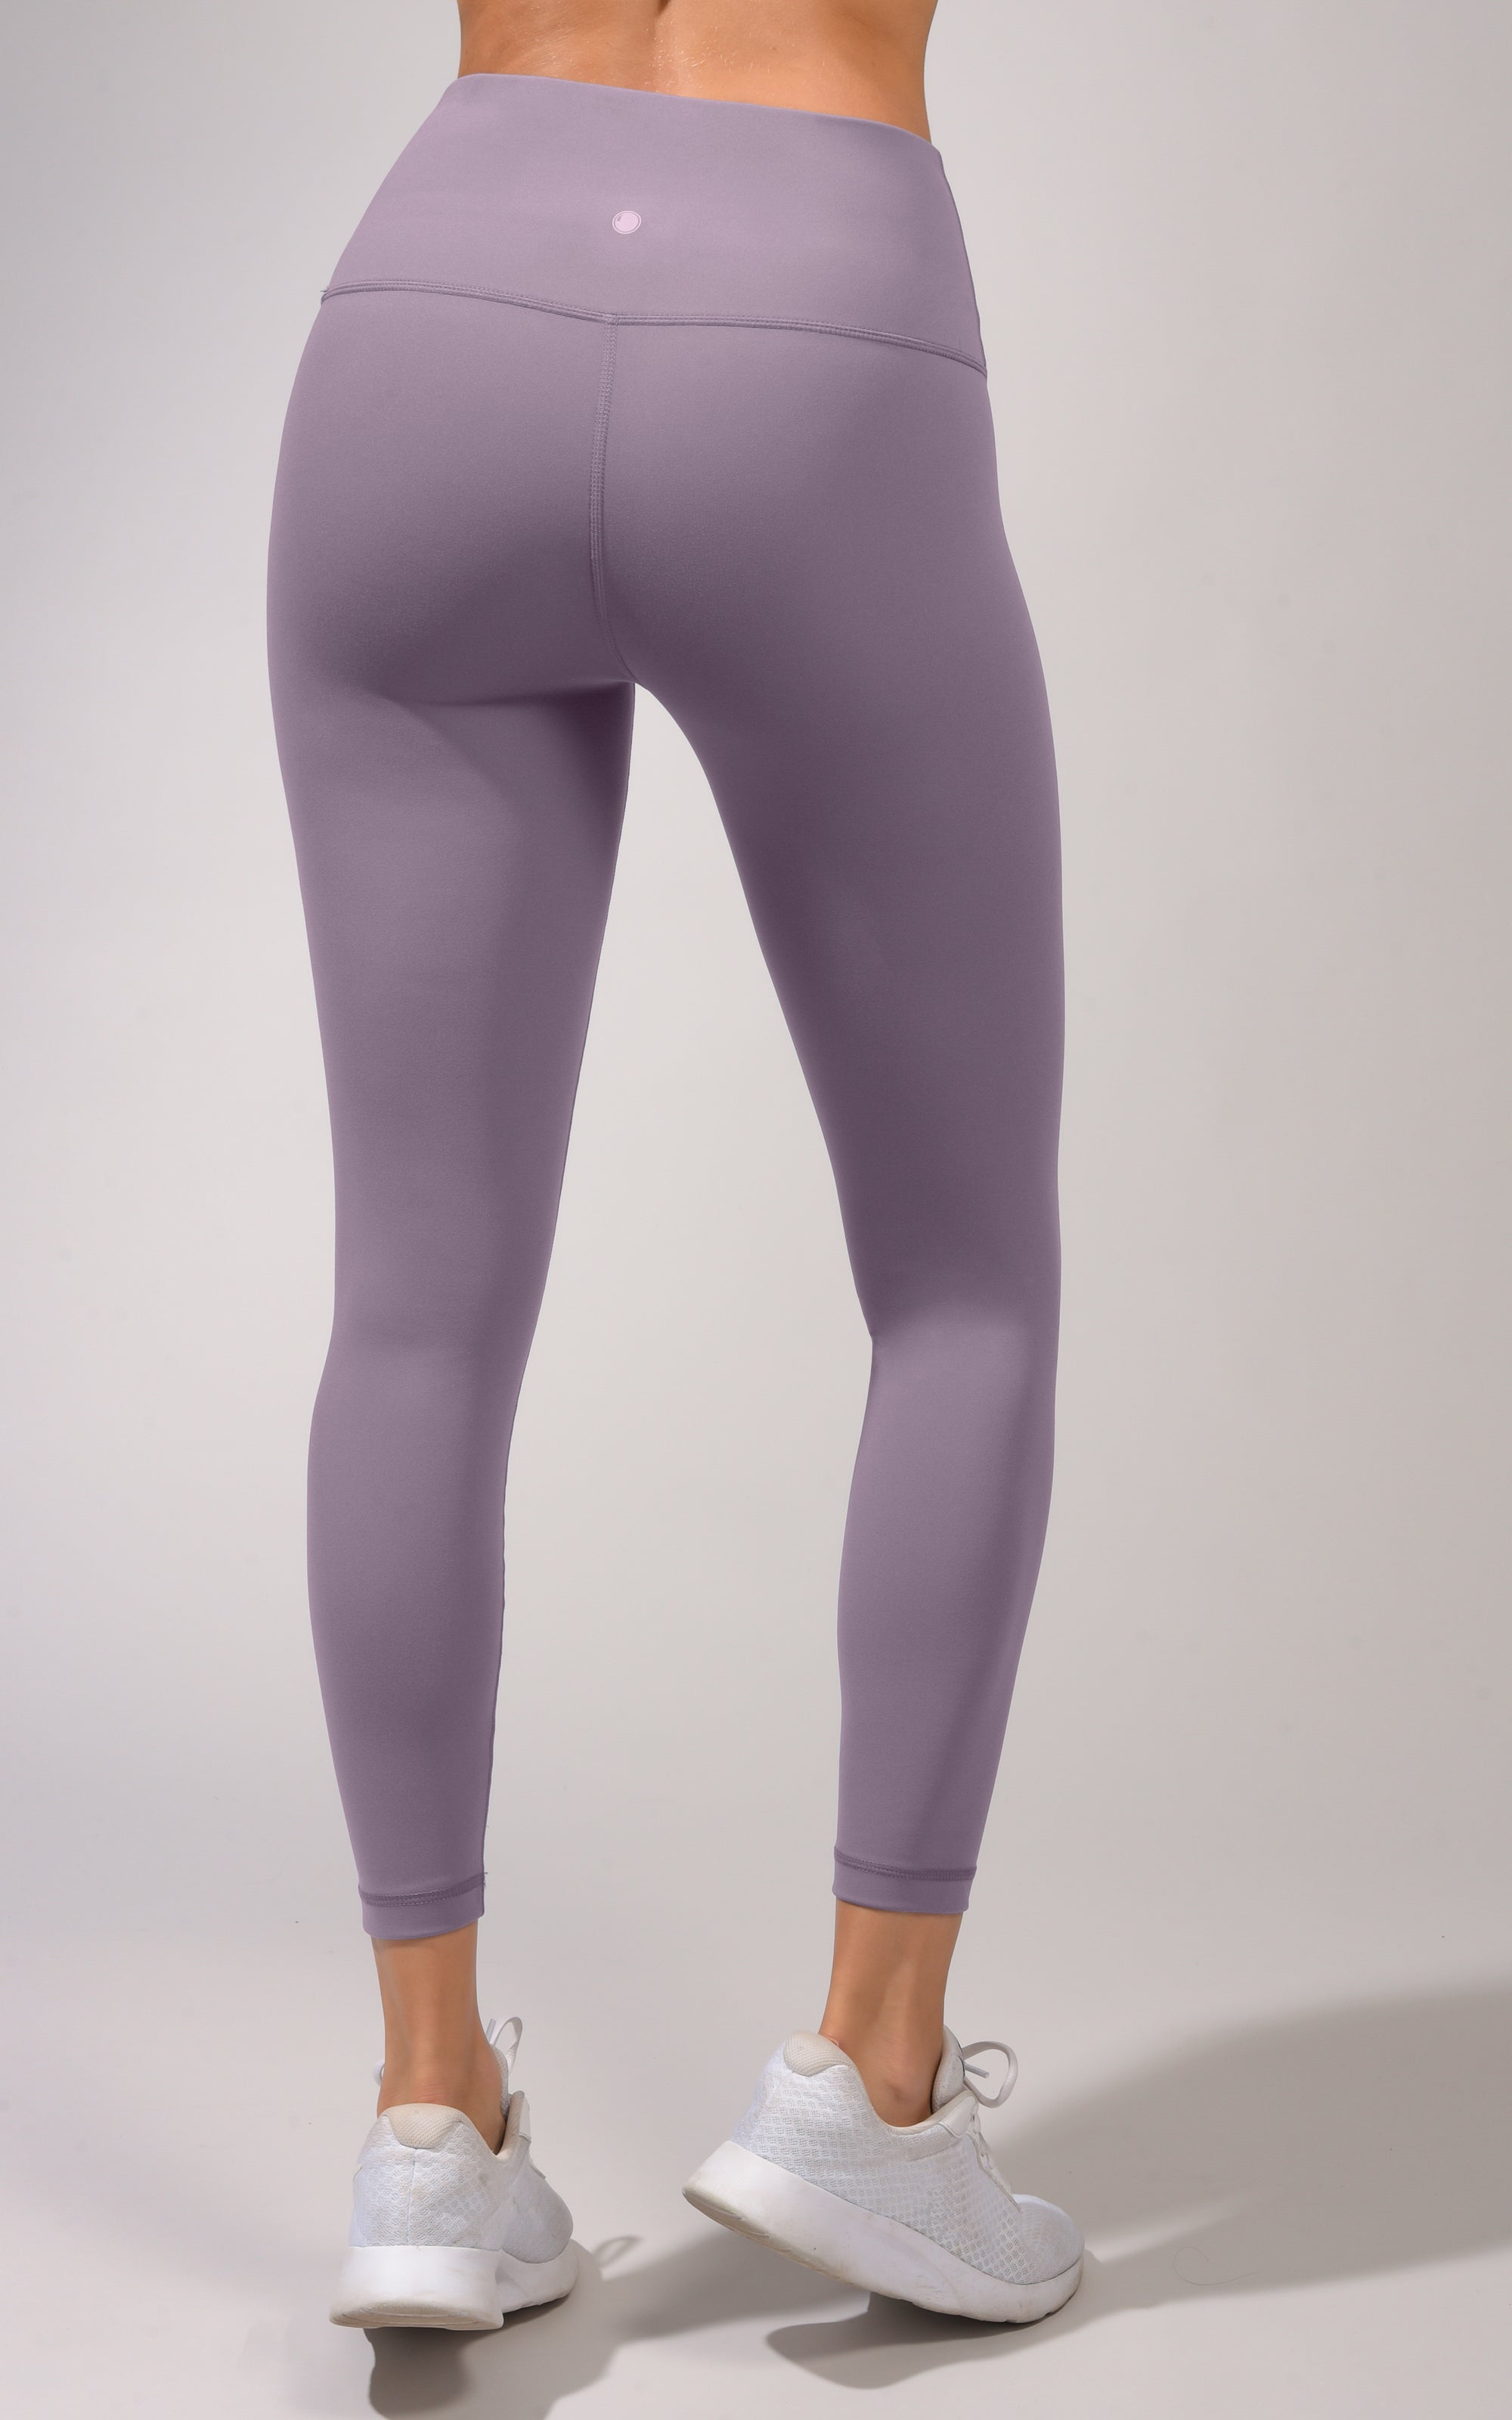 YOGALICIOUS LUX 12 Colors Full-Length Leggings - BRANDED OVERRUNS